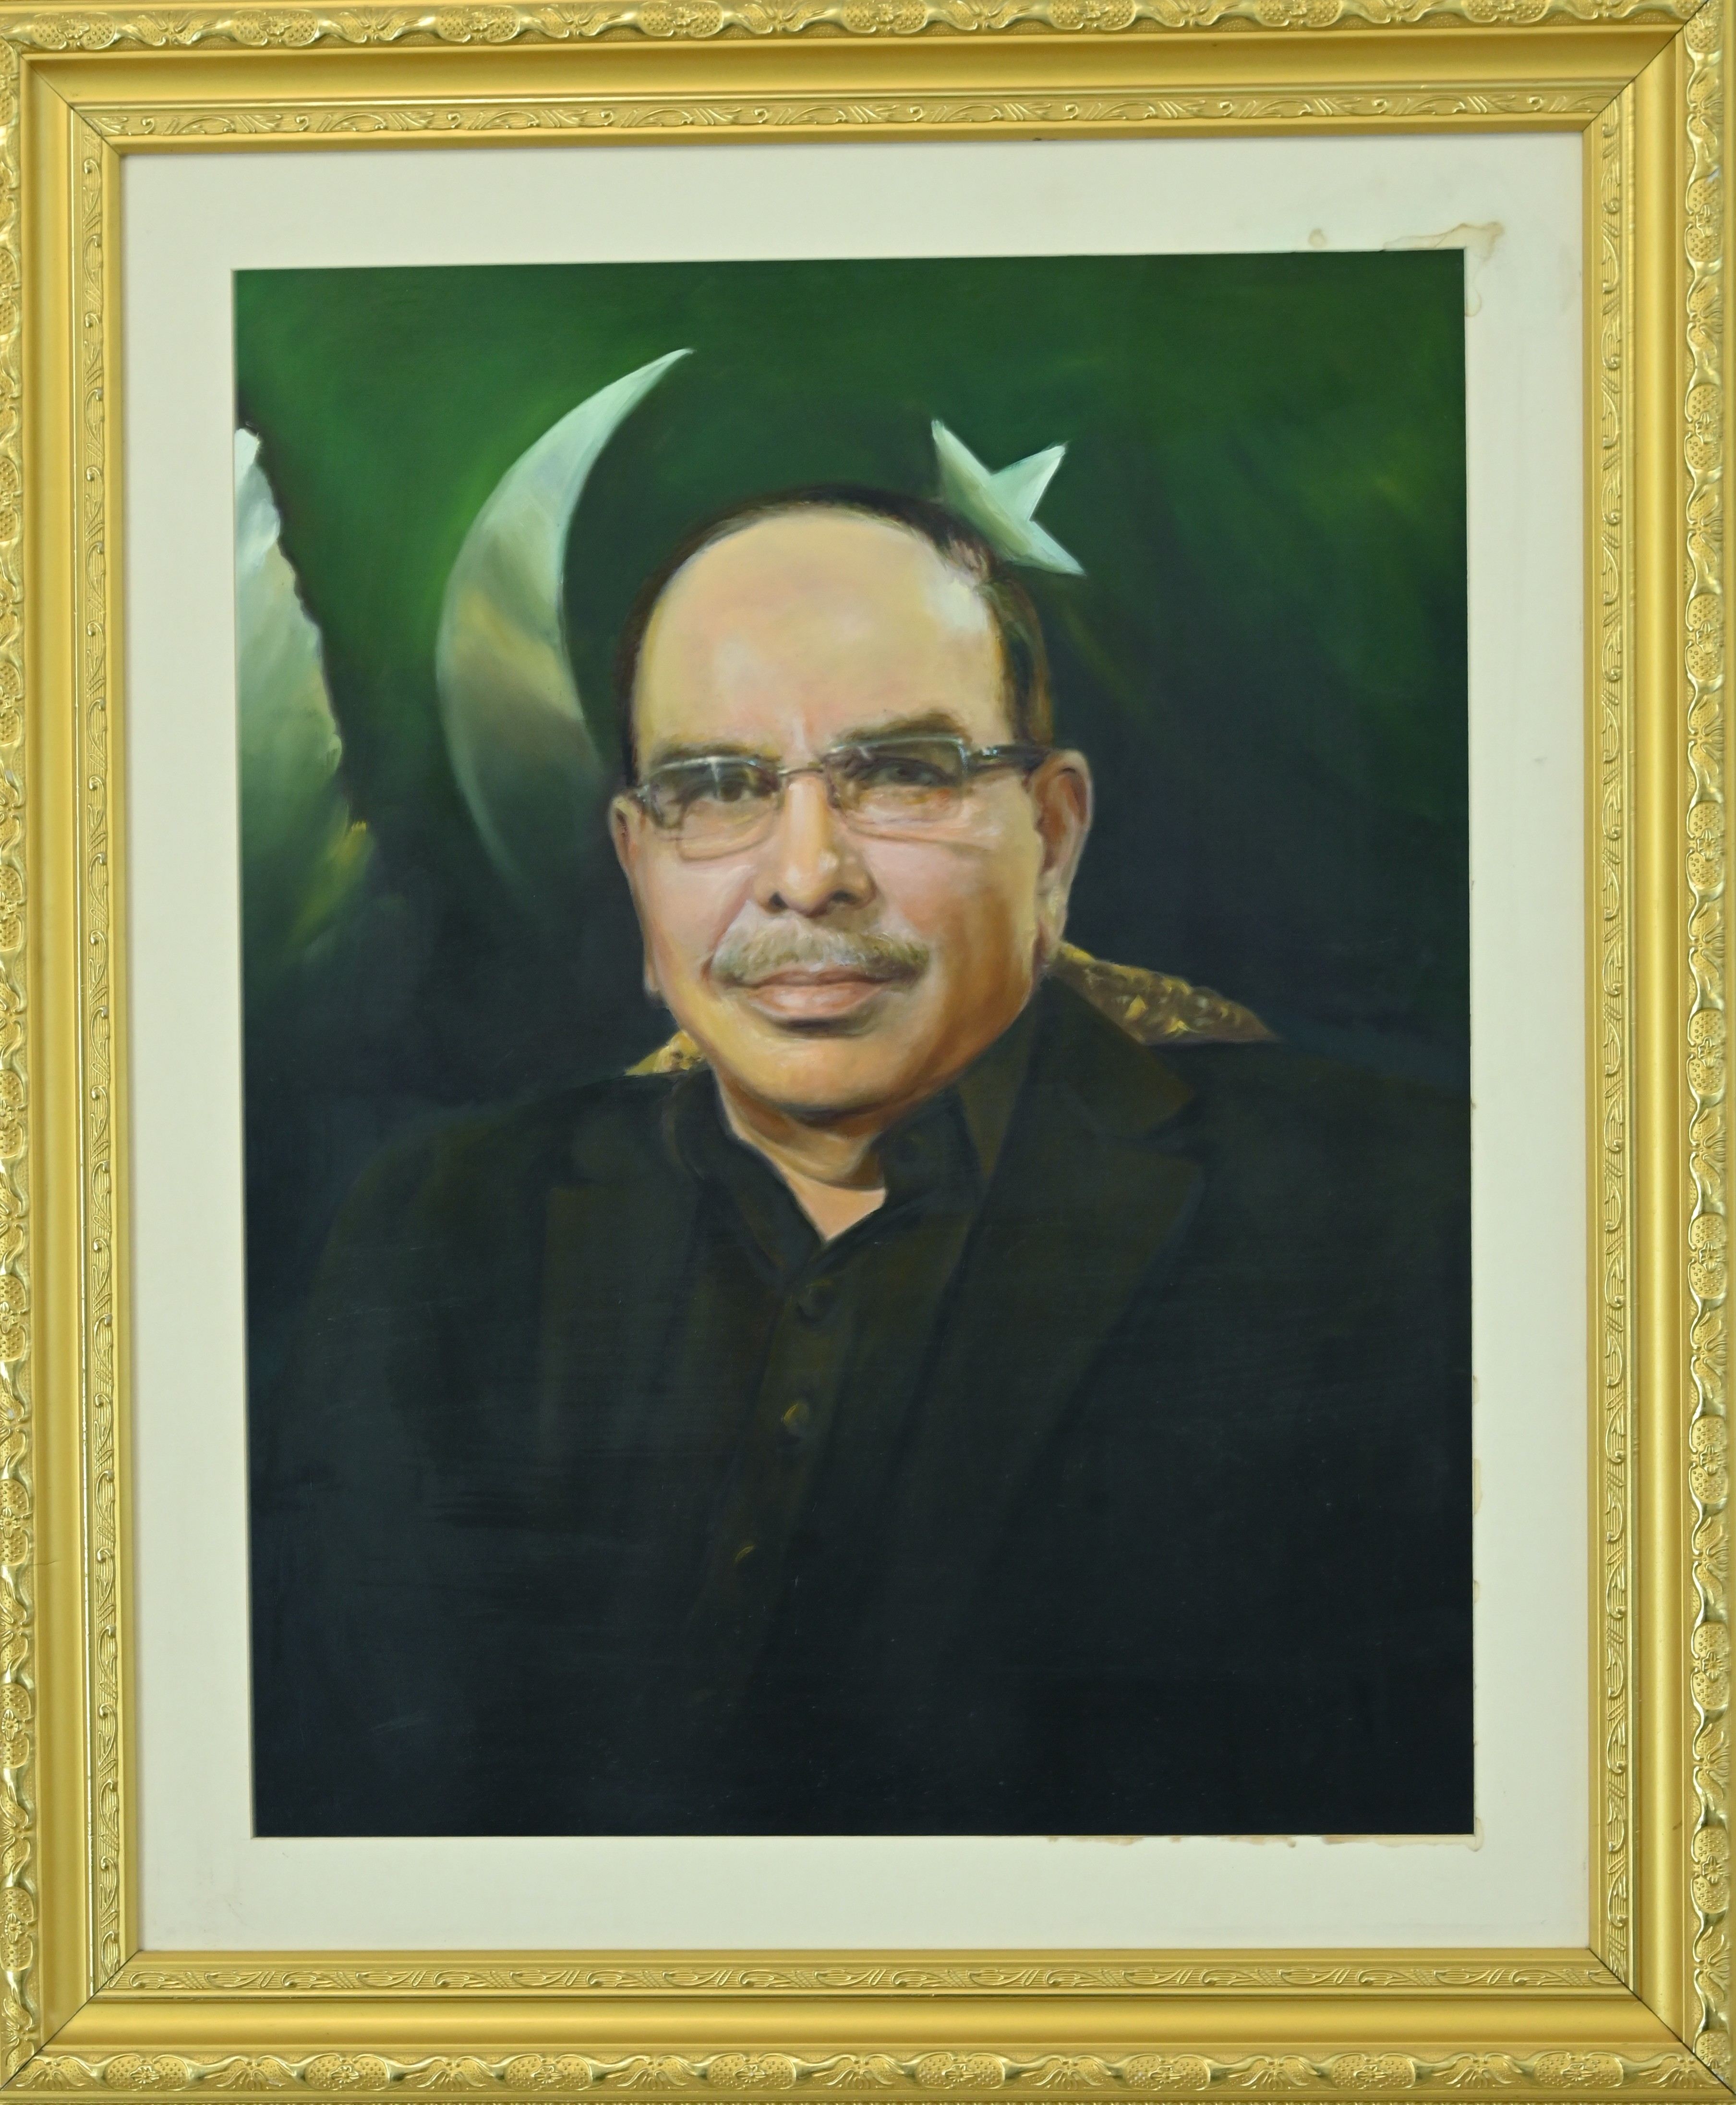 The painting of Malik Riaz Hussain, a Pakistani businessman who is the founder of Bahria Town, the largest privately held real estate development company in Pakistan